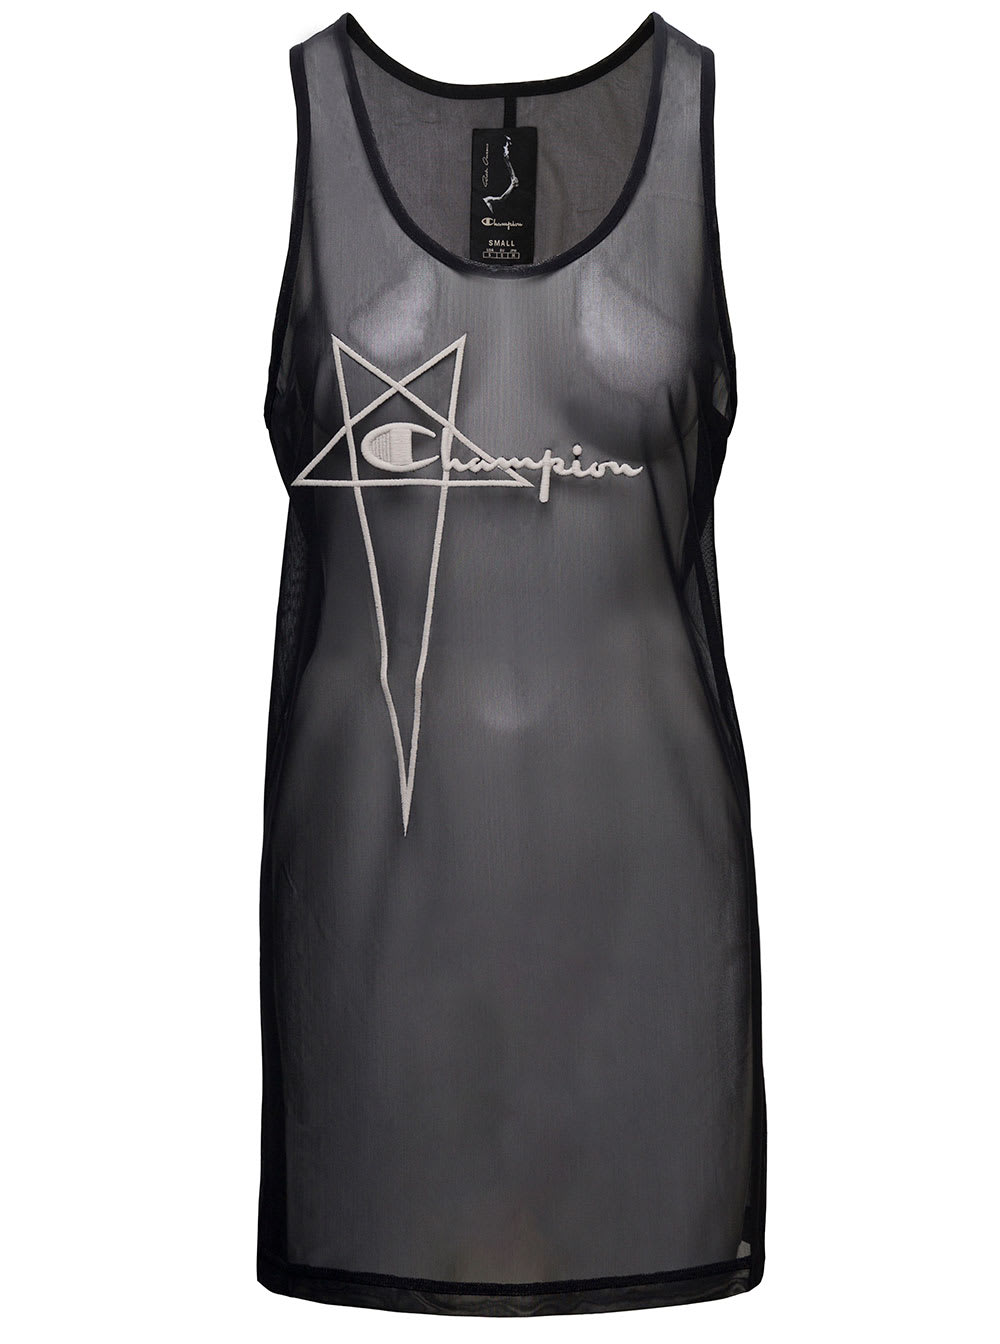 RICK OWENS BASKETBALL MINI BLACK DRESS WITH PENTAGRAM EMBROIDERY AT THE FRONT IN MICROMESH WOMAN